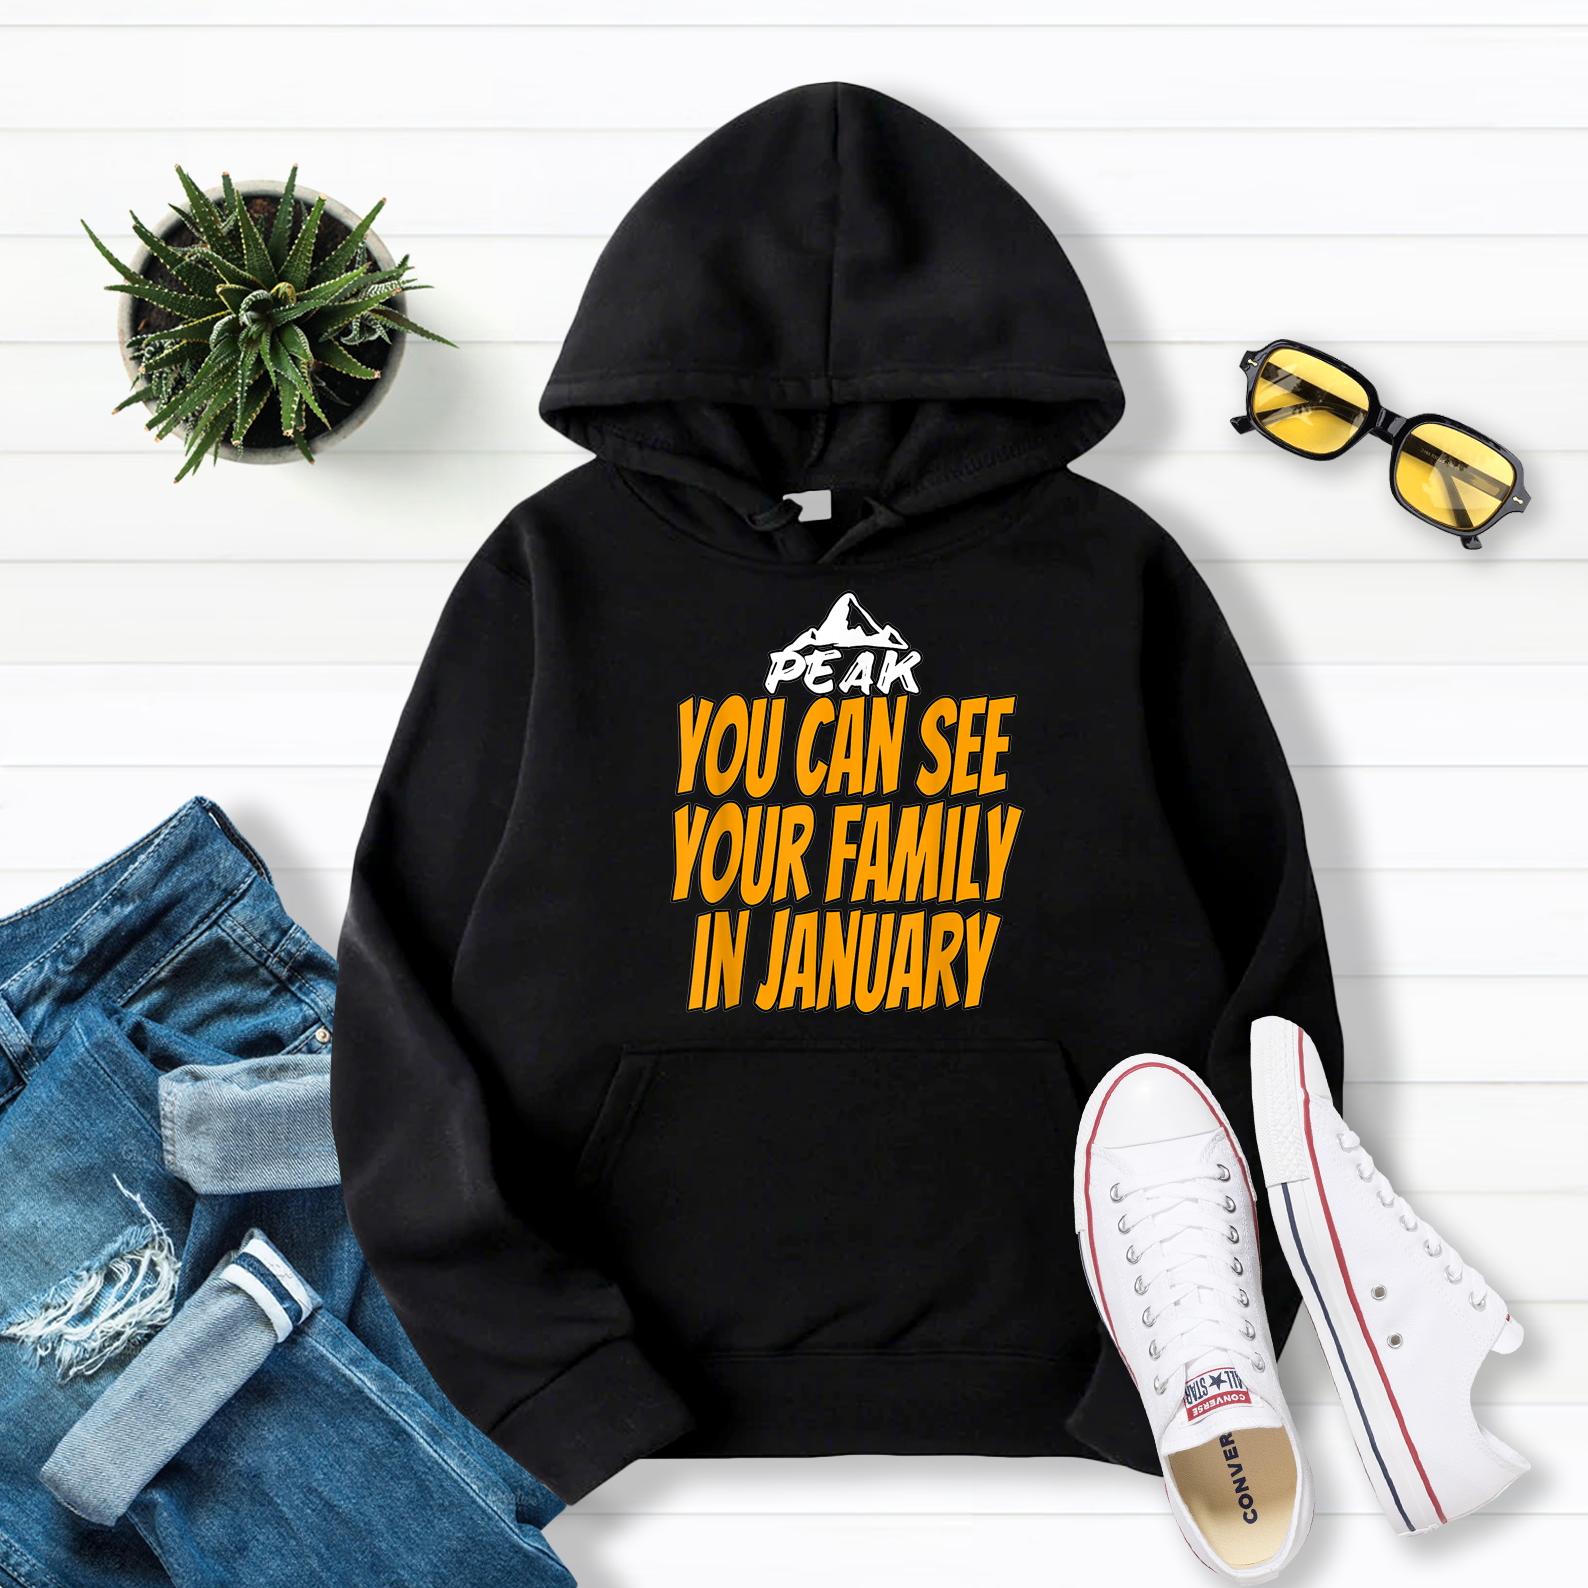 Welcome To Peak See Your Family in January For Associates Pullover Hoodie Black S-5XL